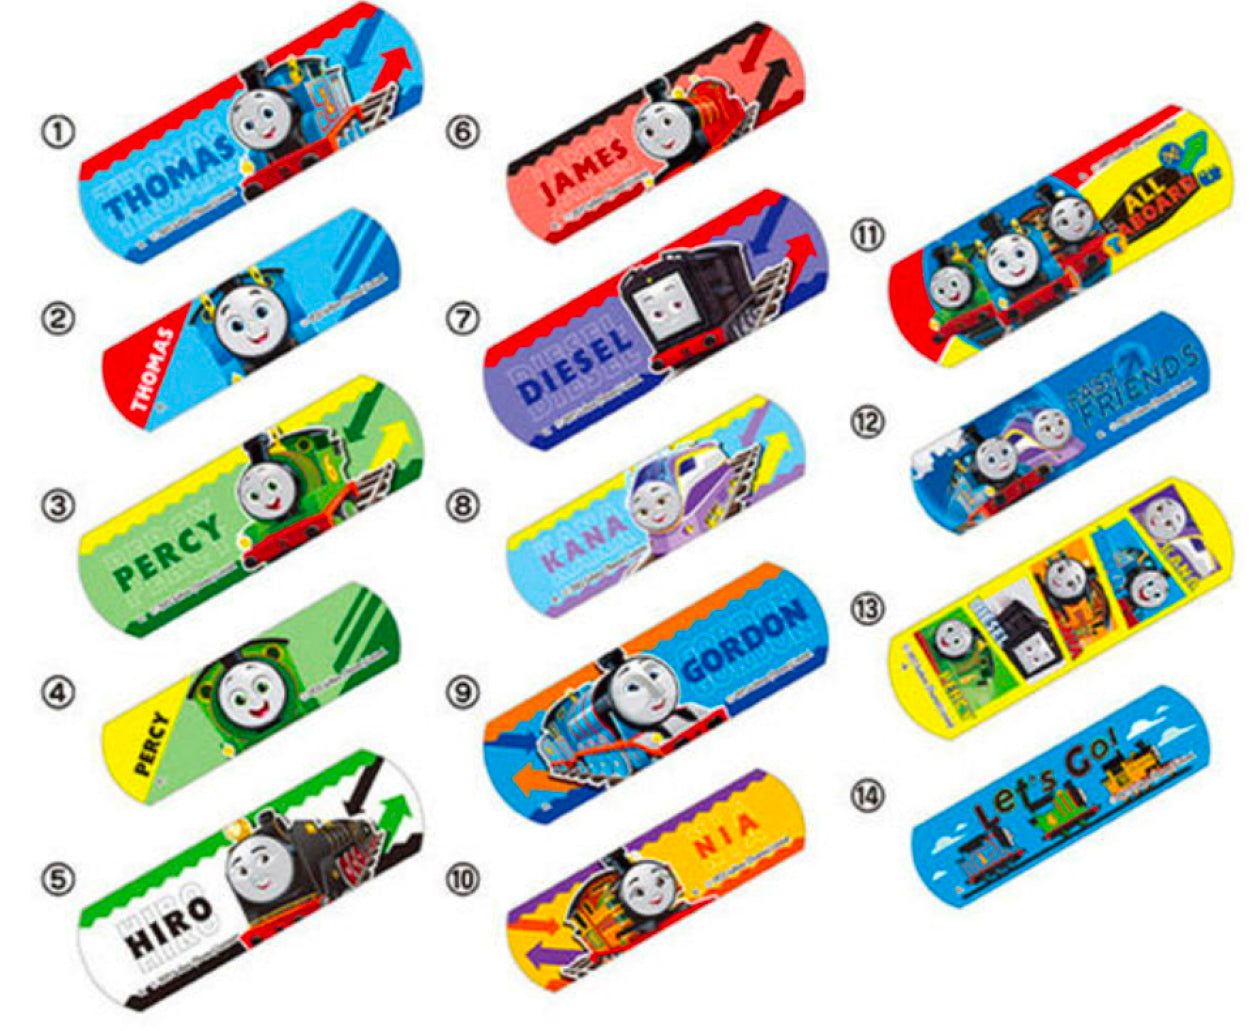 Thomas the Tank Engine Plasters Band-aids